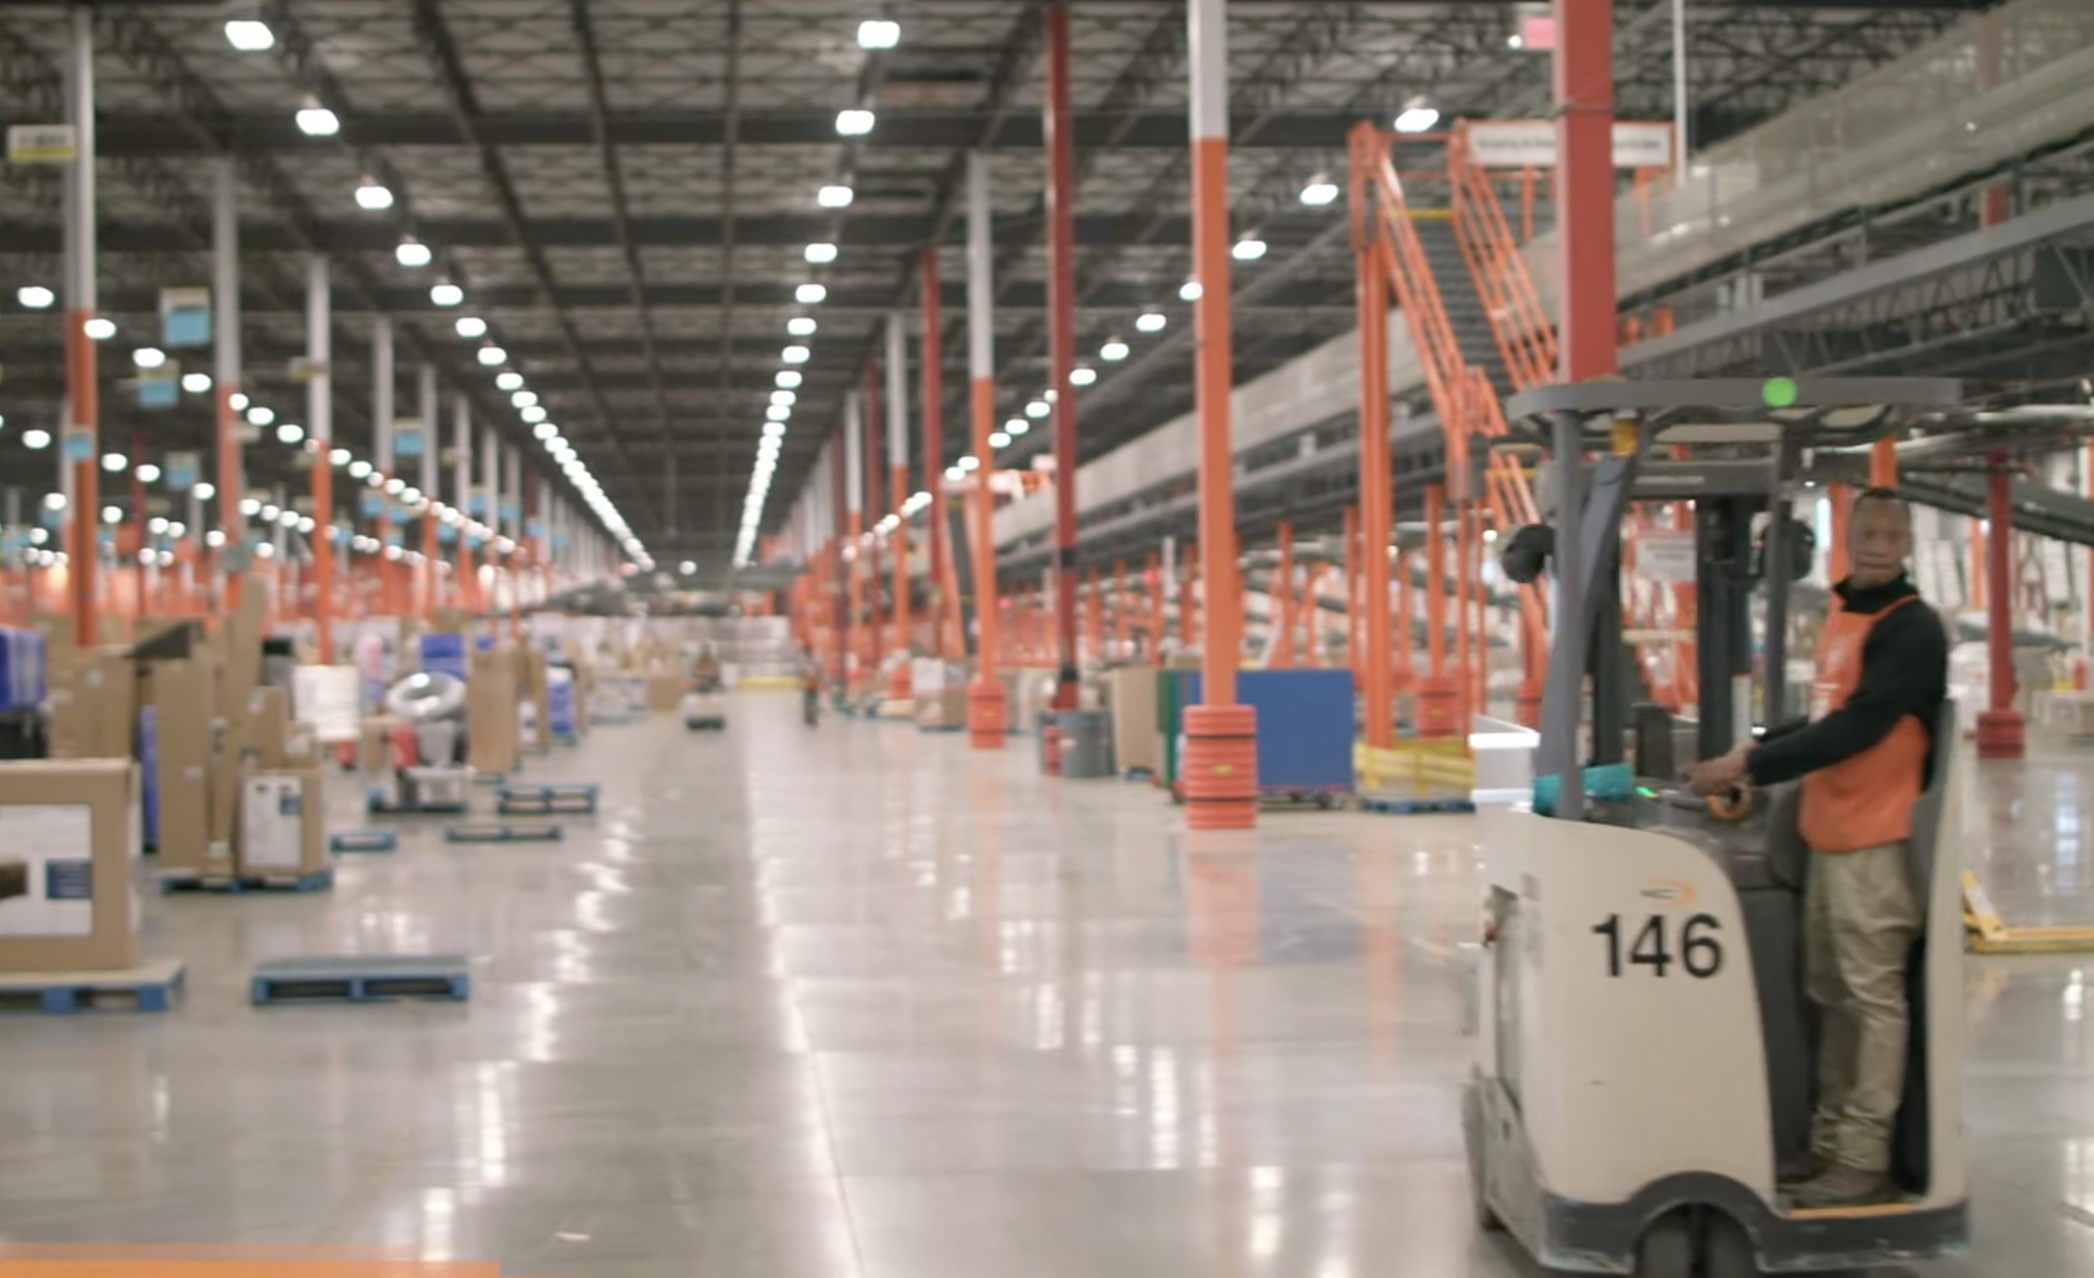 New type of distribution center is a first for Home Depot